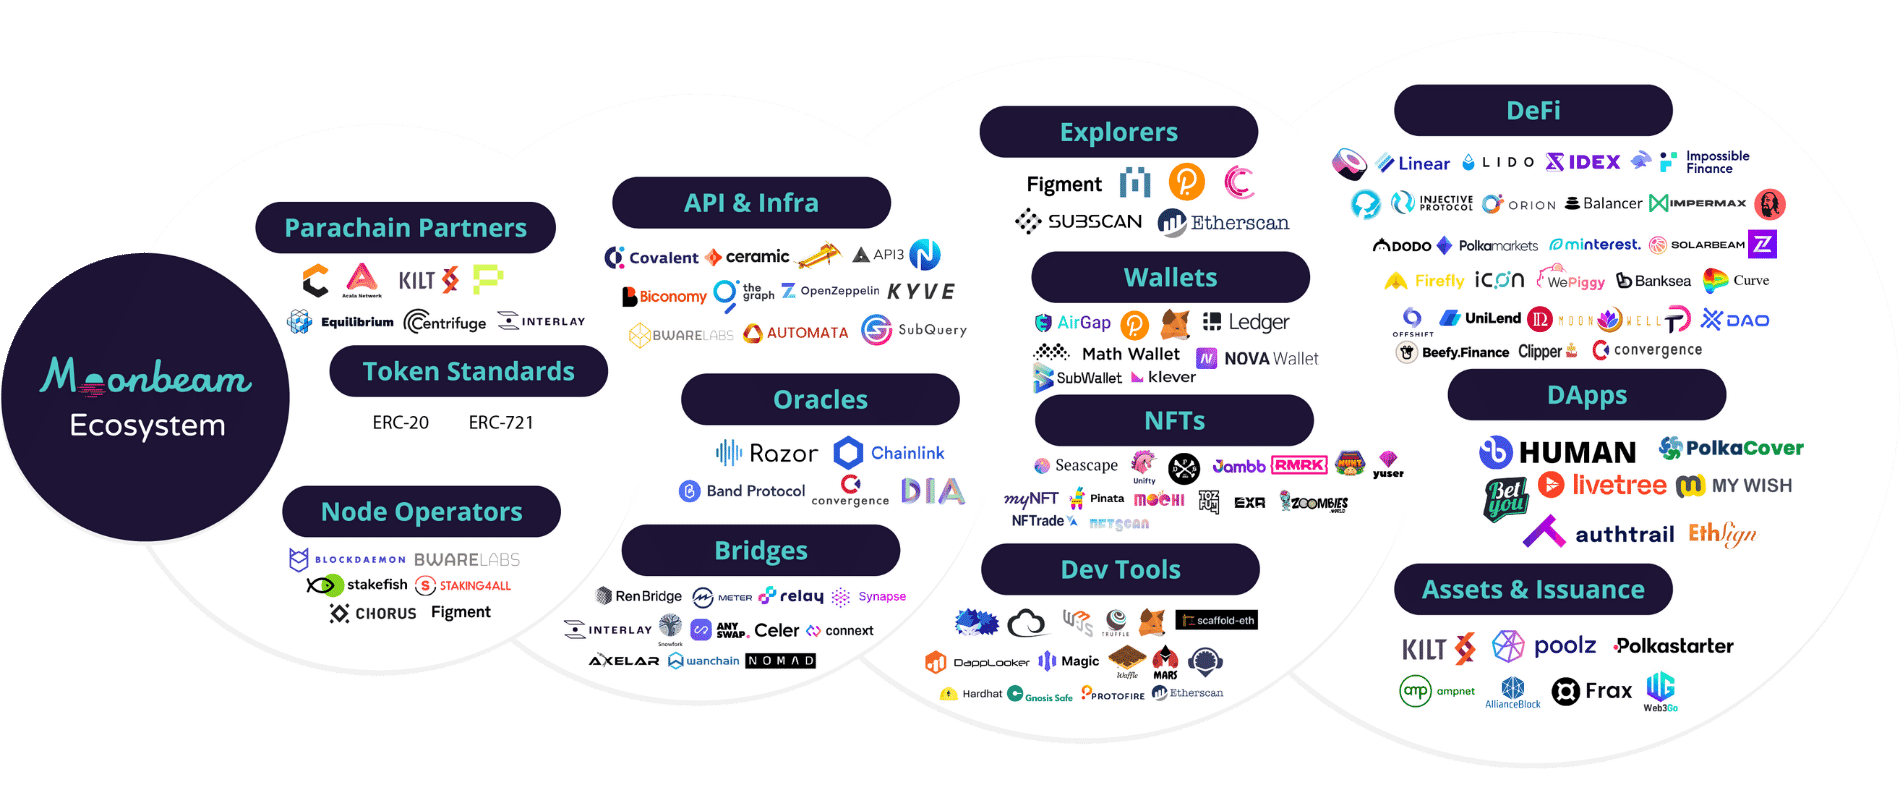 Moonbeam cross-chain: A diagram of applications, developer tools, etc., in the Moonbeam ecosystem, an Axelar-connected chain.